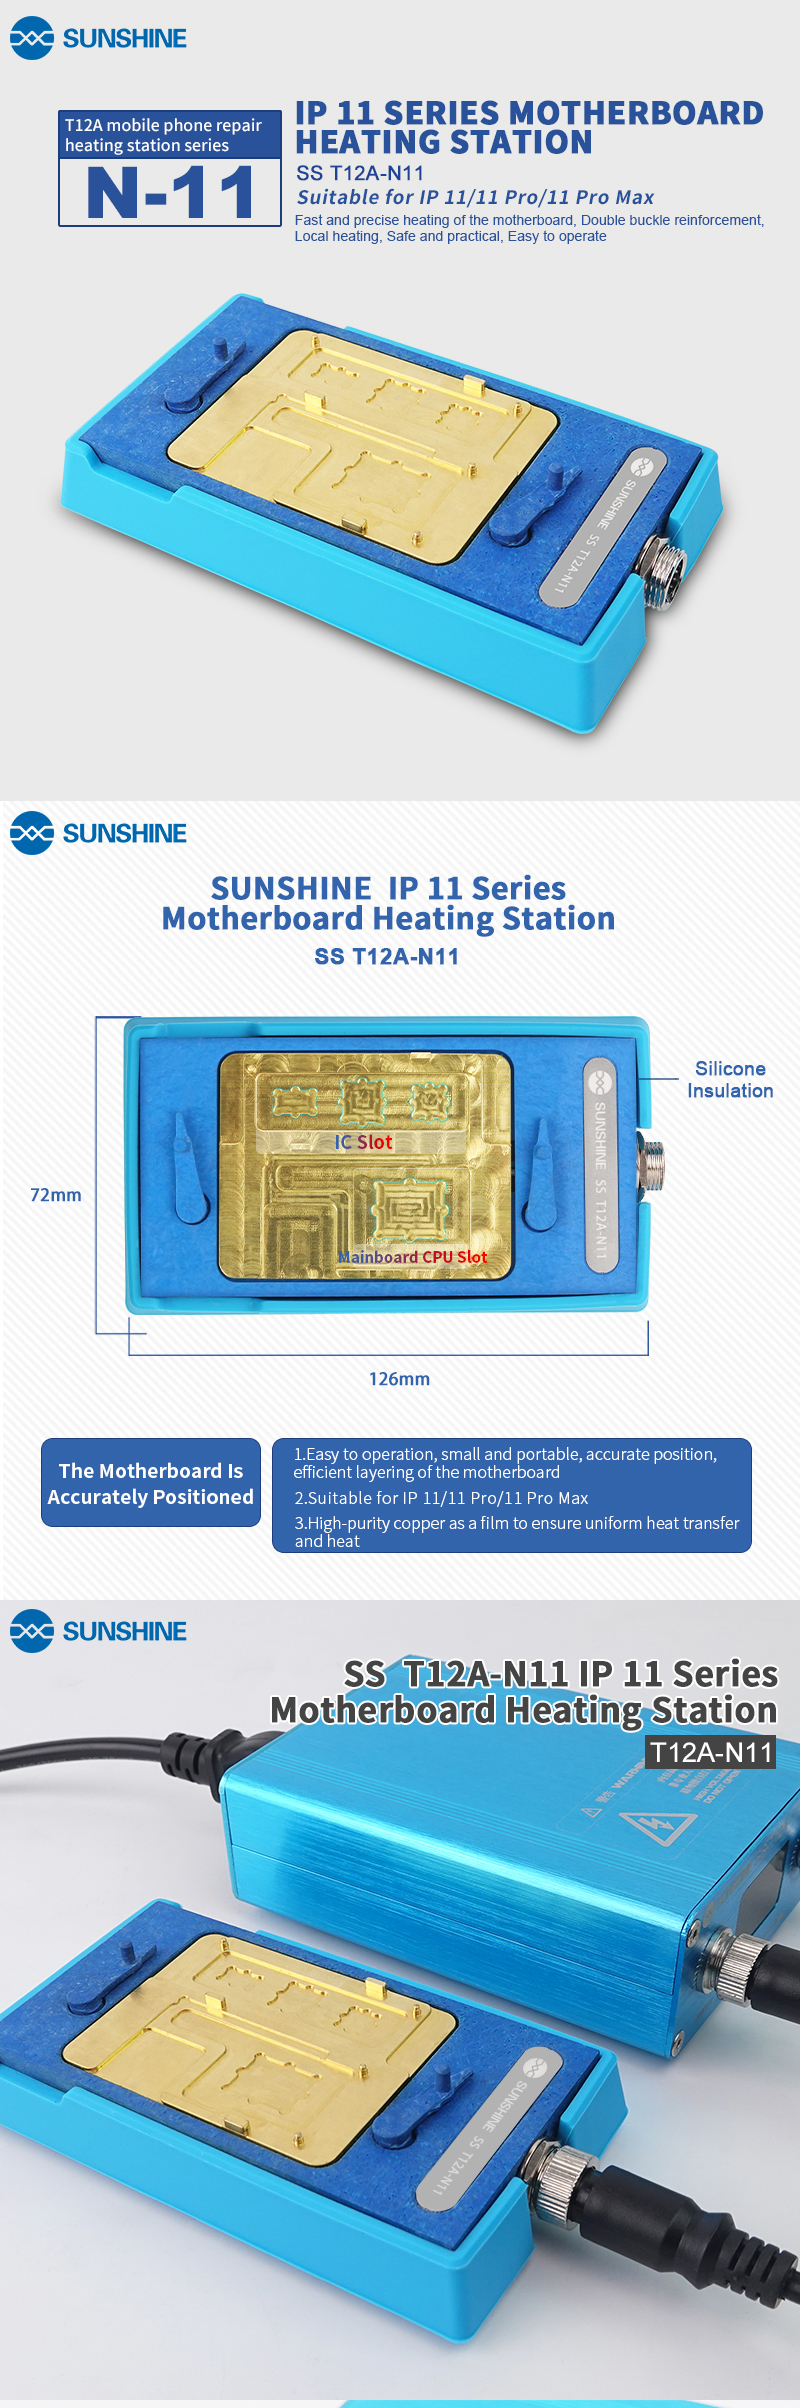 SS-T12A-for-iPhone-X-Motherboard-Stratified-Heating-Table-185-Degrees-Accurate-Rapid-Separation-Disa-1616602-1